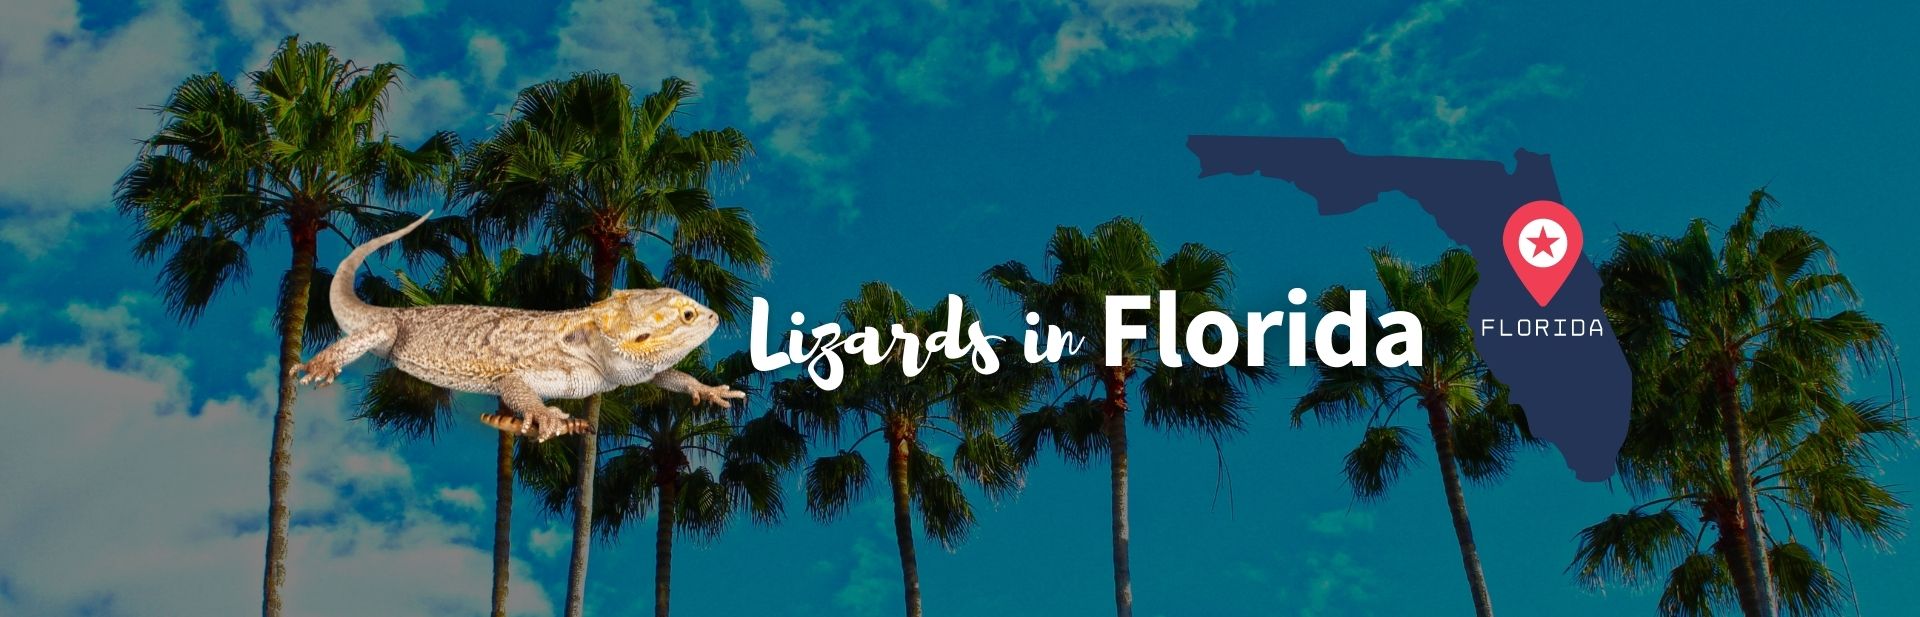 18 Most Common Types of Lizards in Florida: ID Guide + Photos, and more